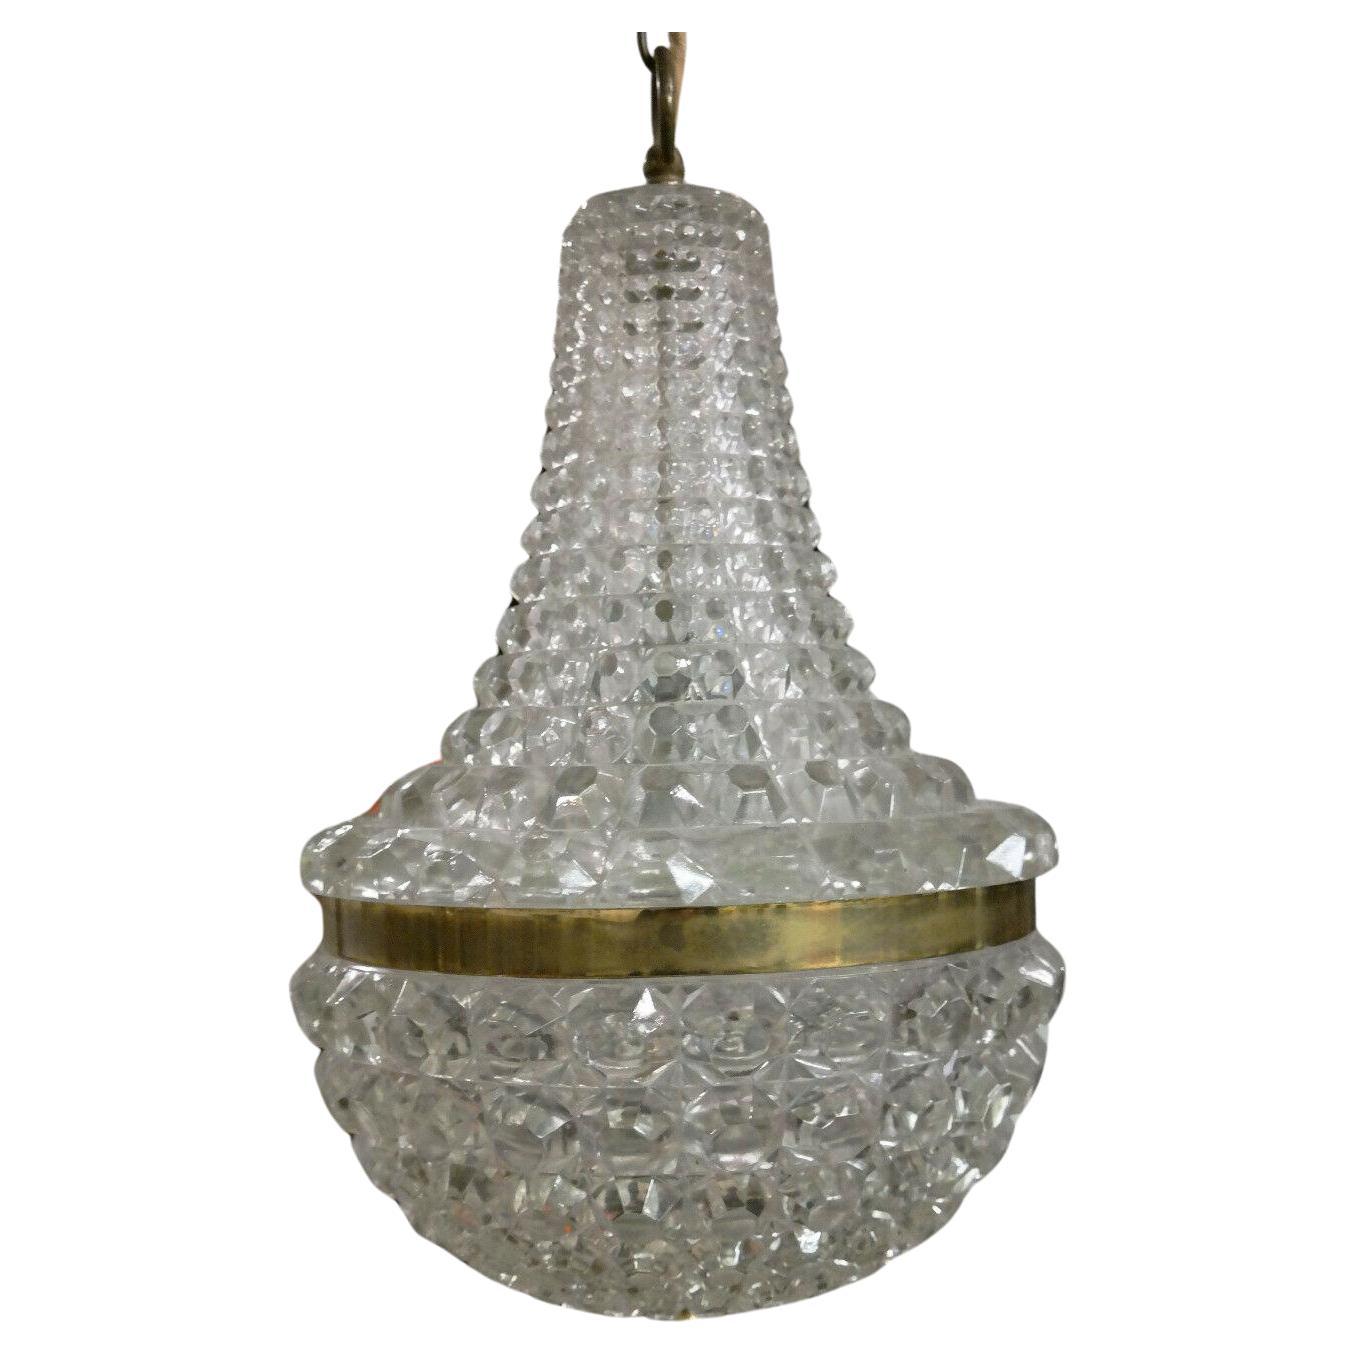 1950's French Mid Century Modern Formed Glass Bag and Tent Chandelier - Baccarat For Sale